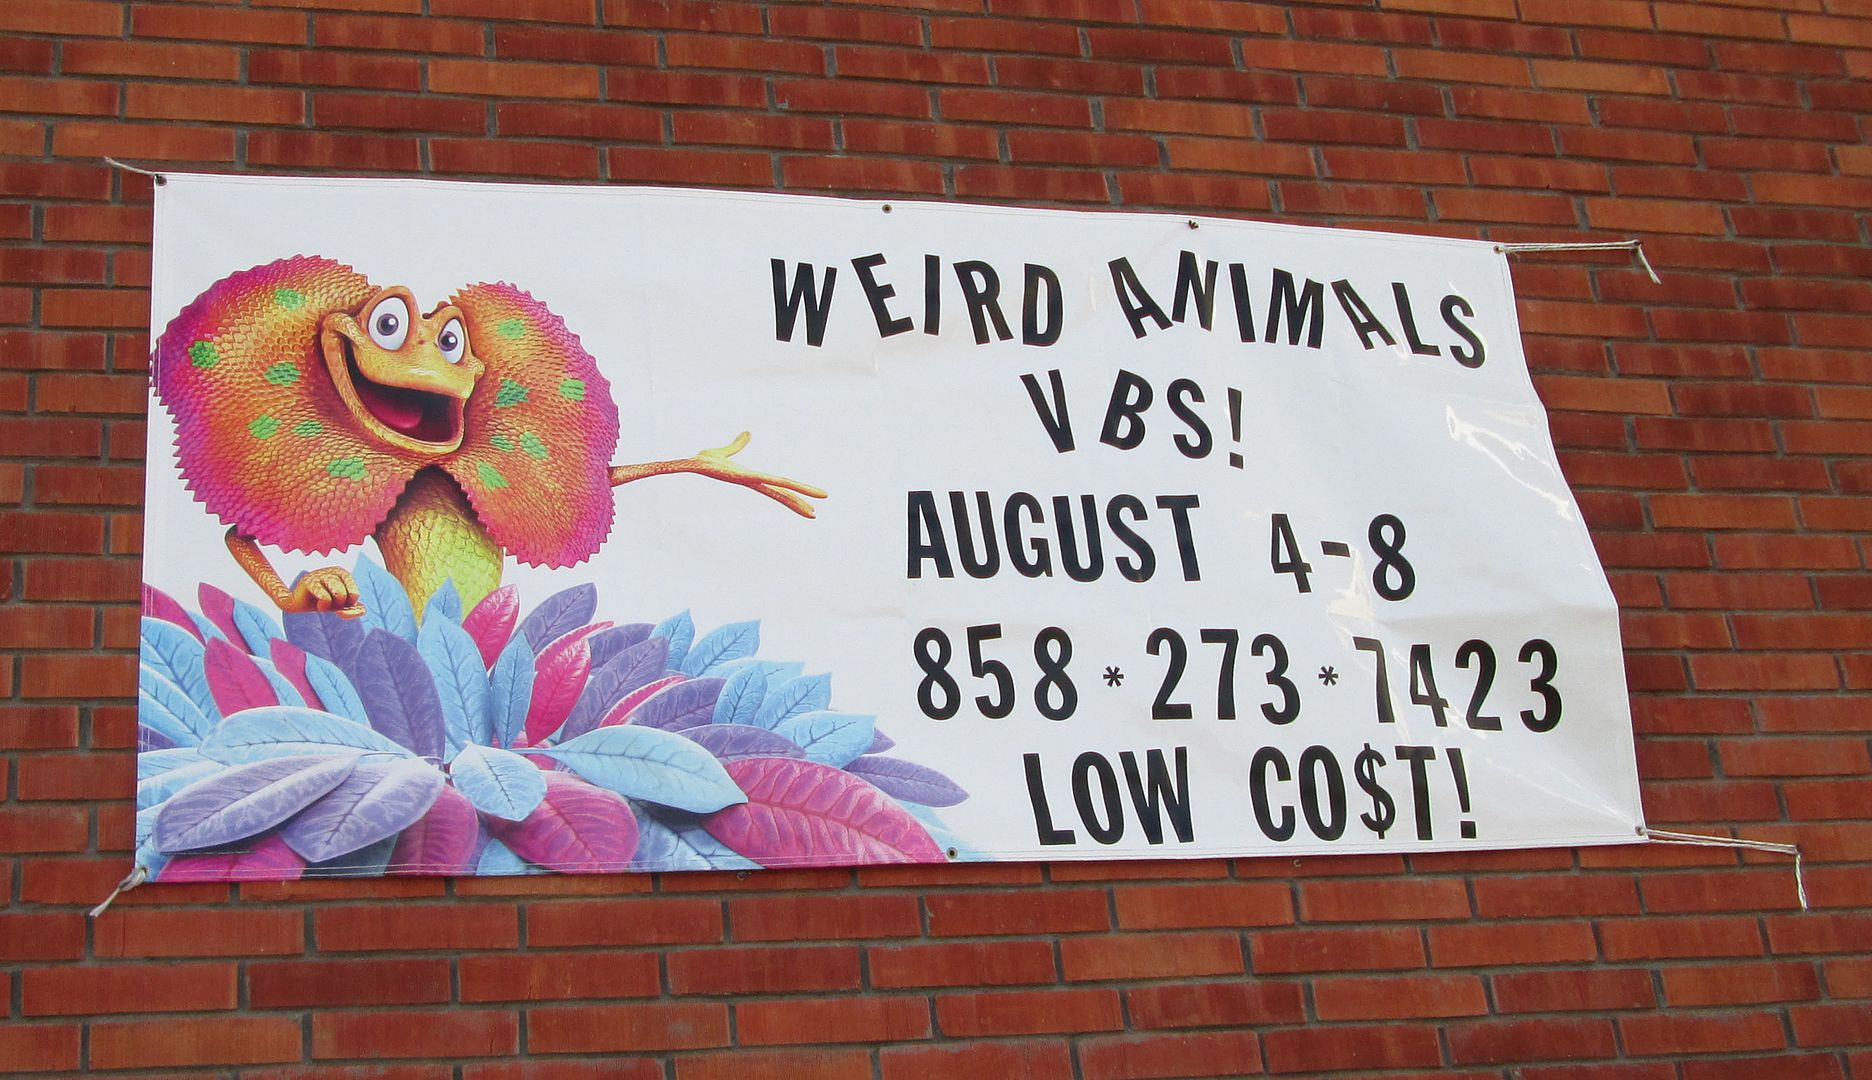 VBS 2014 outside sign